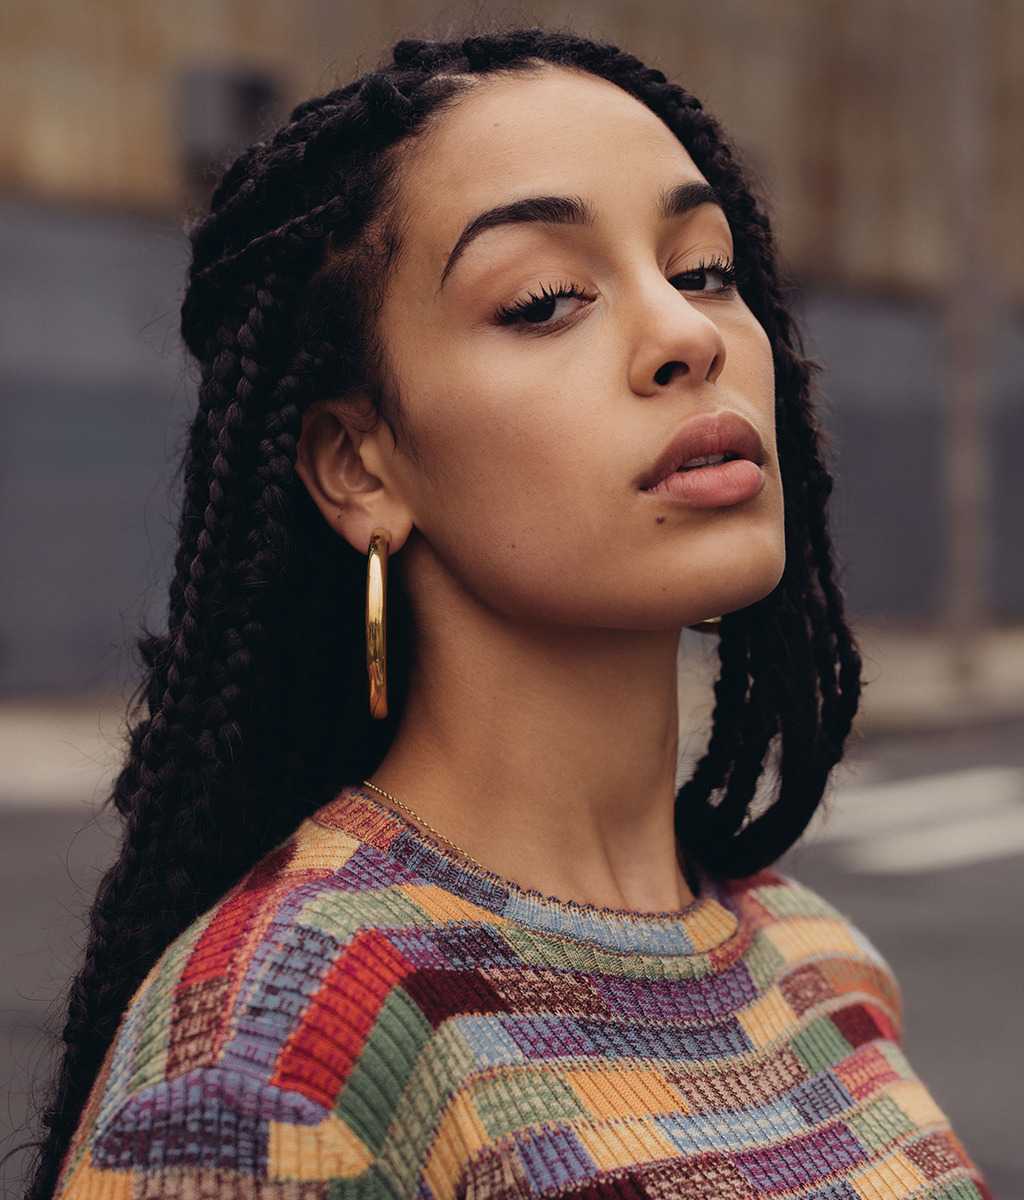 70+ Hot Pictures Of Jorja Smith Which Will Make Your Day 5